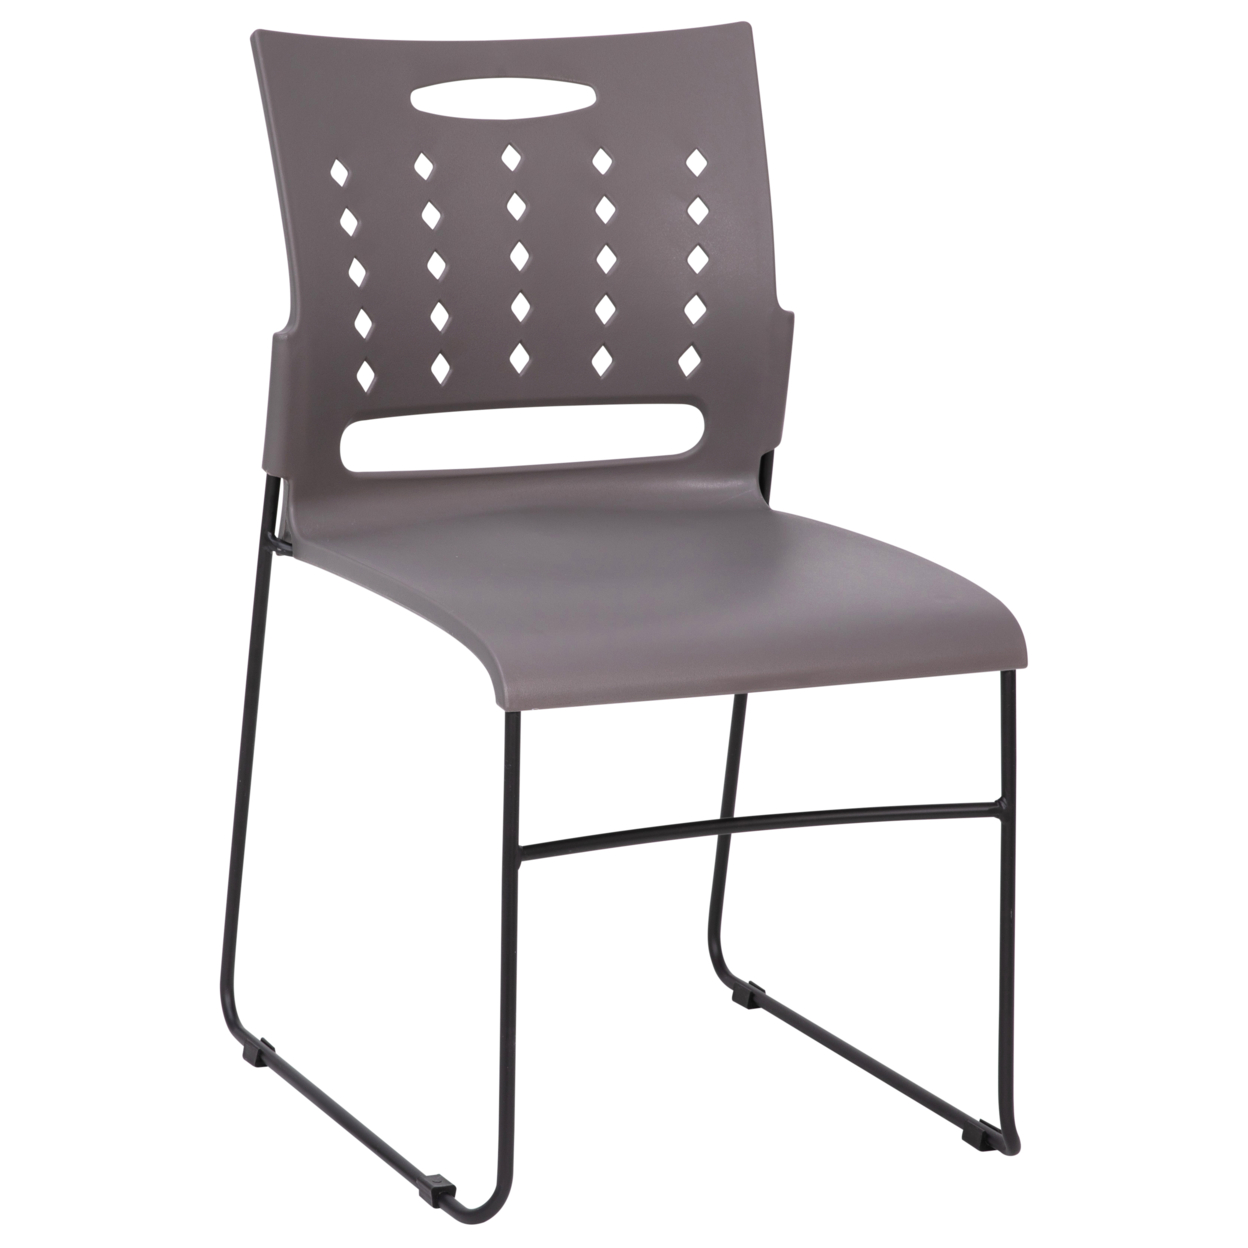 2 Piece Chairs, Gray Plasti Frame, Curved Flared Back, Cut Out Design